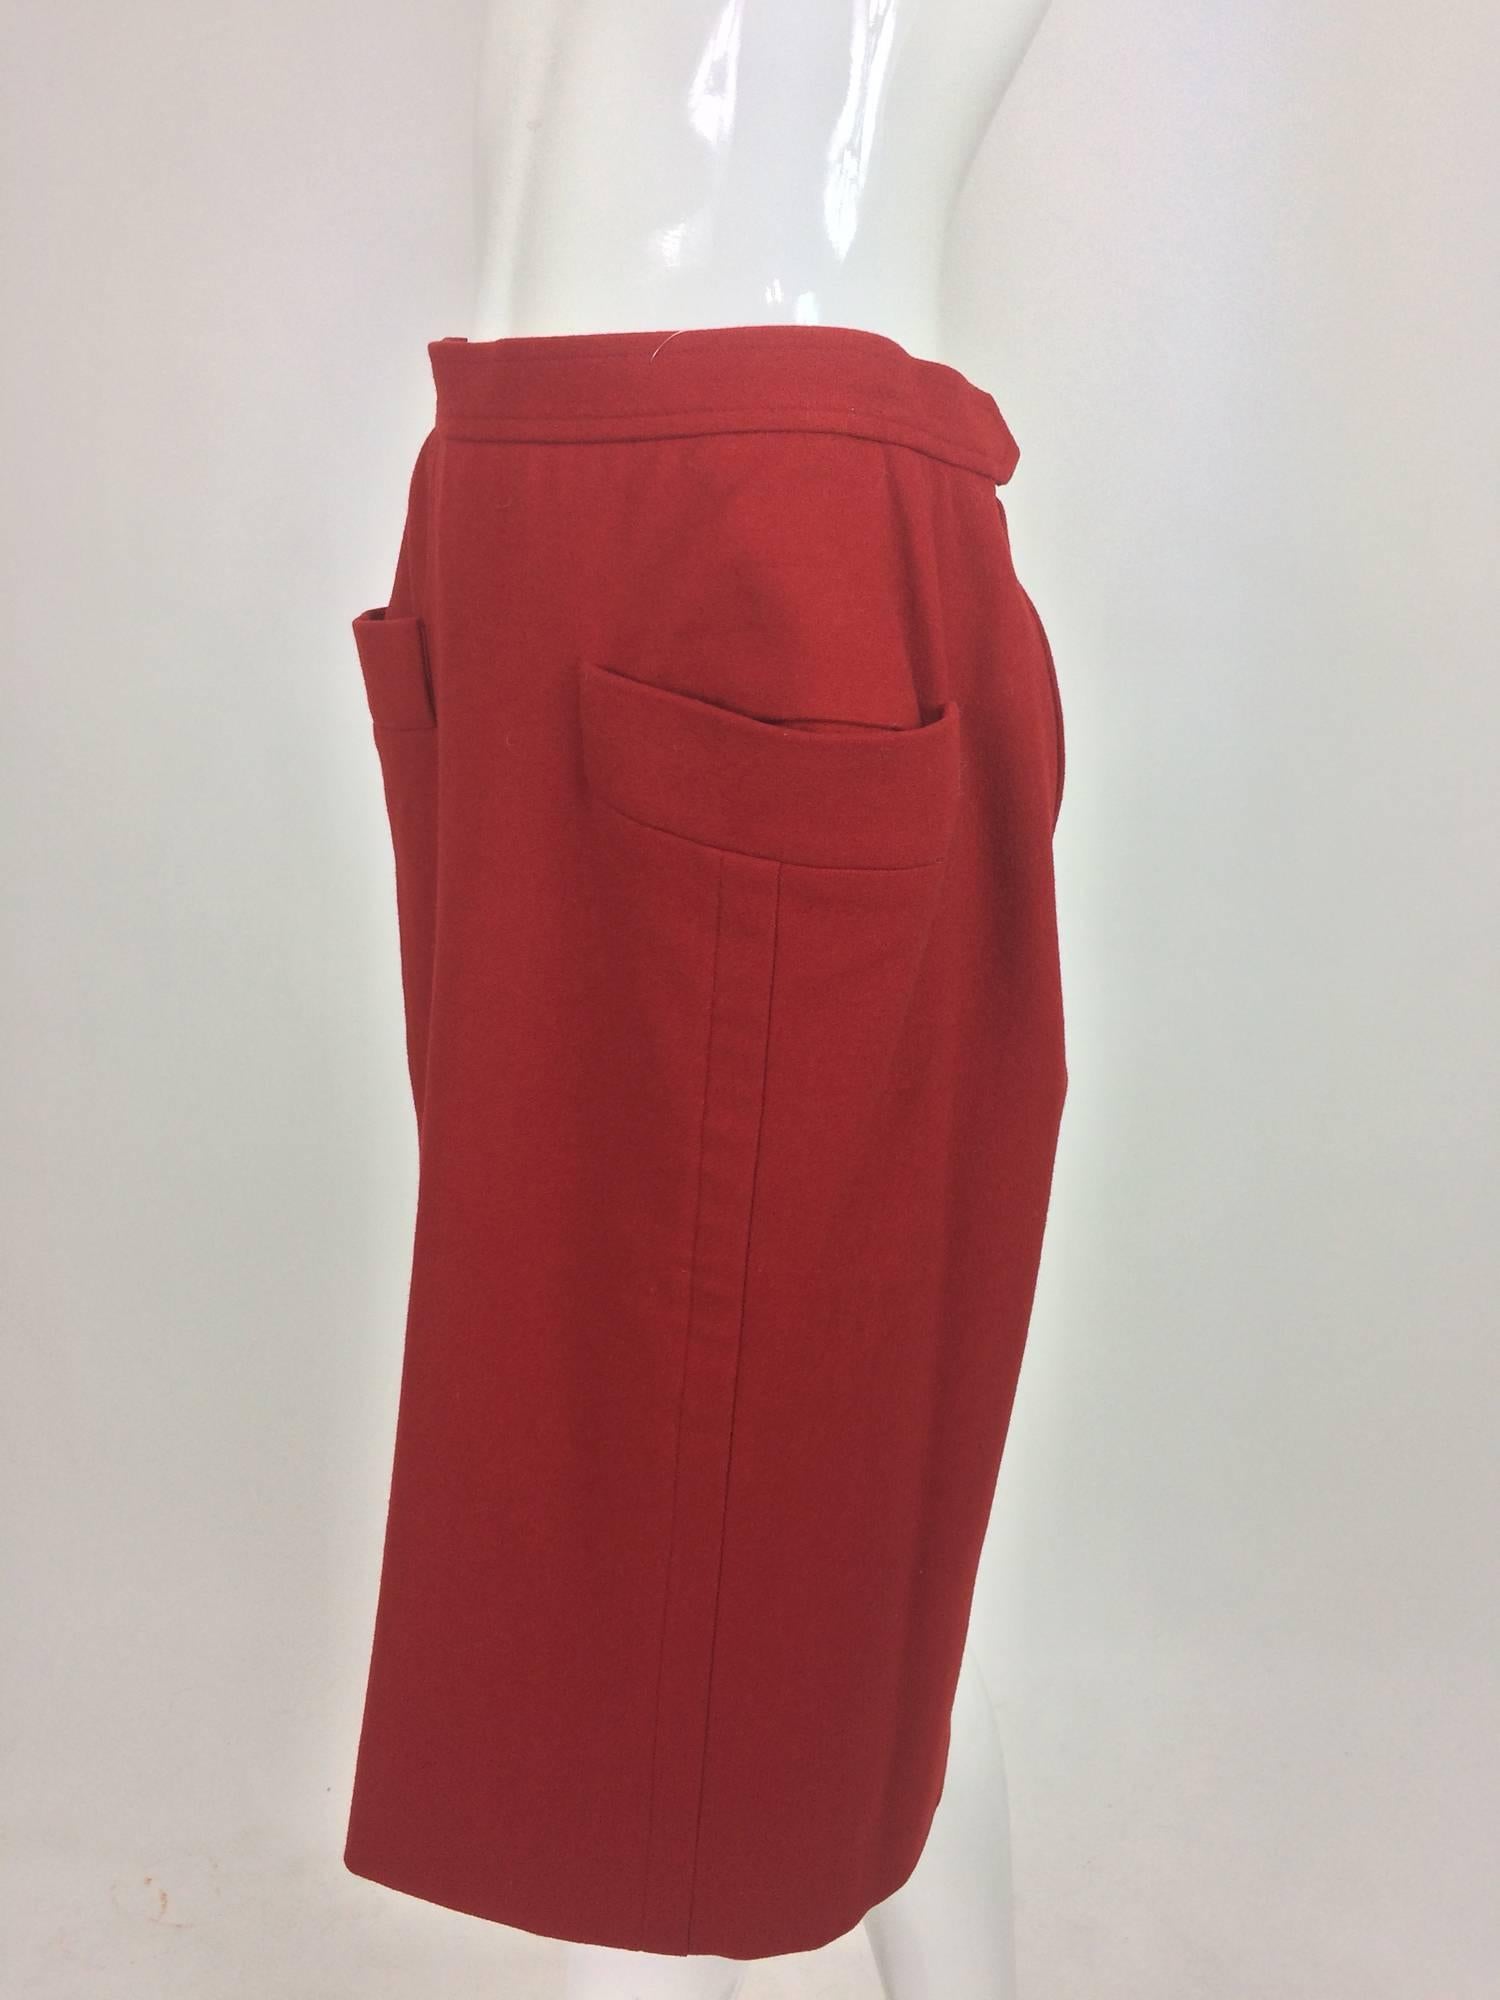 Vintage Yves Saint Laurent brick red wool skirt with hip front pockets 1980s 1